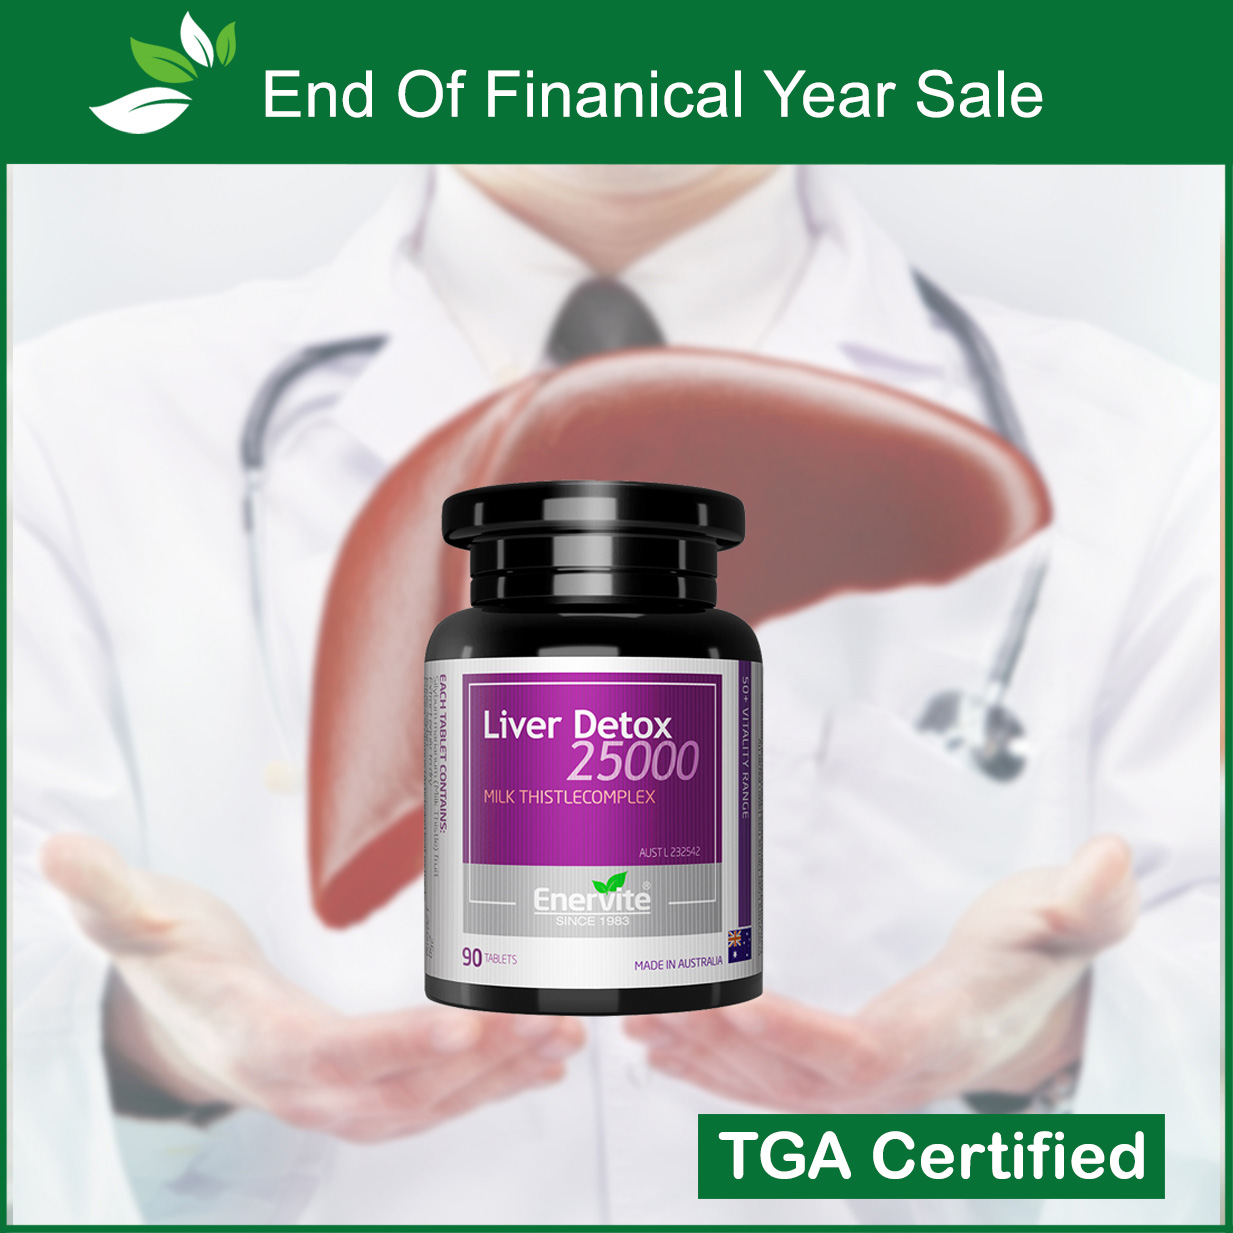 End of Financial Year Liver Detox On Sale